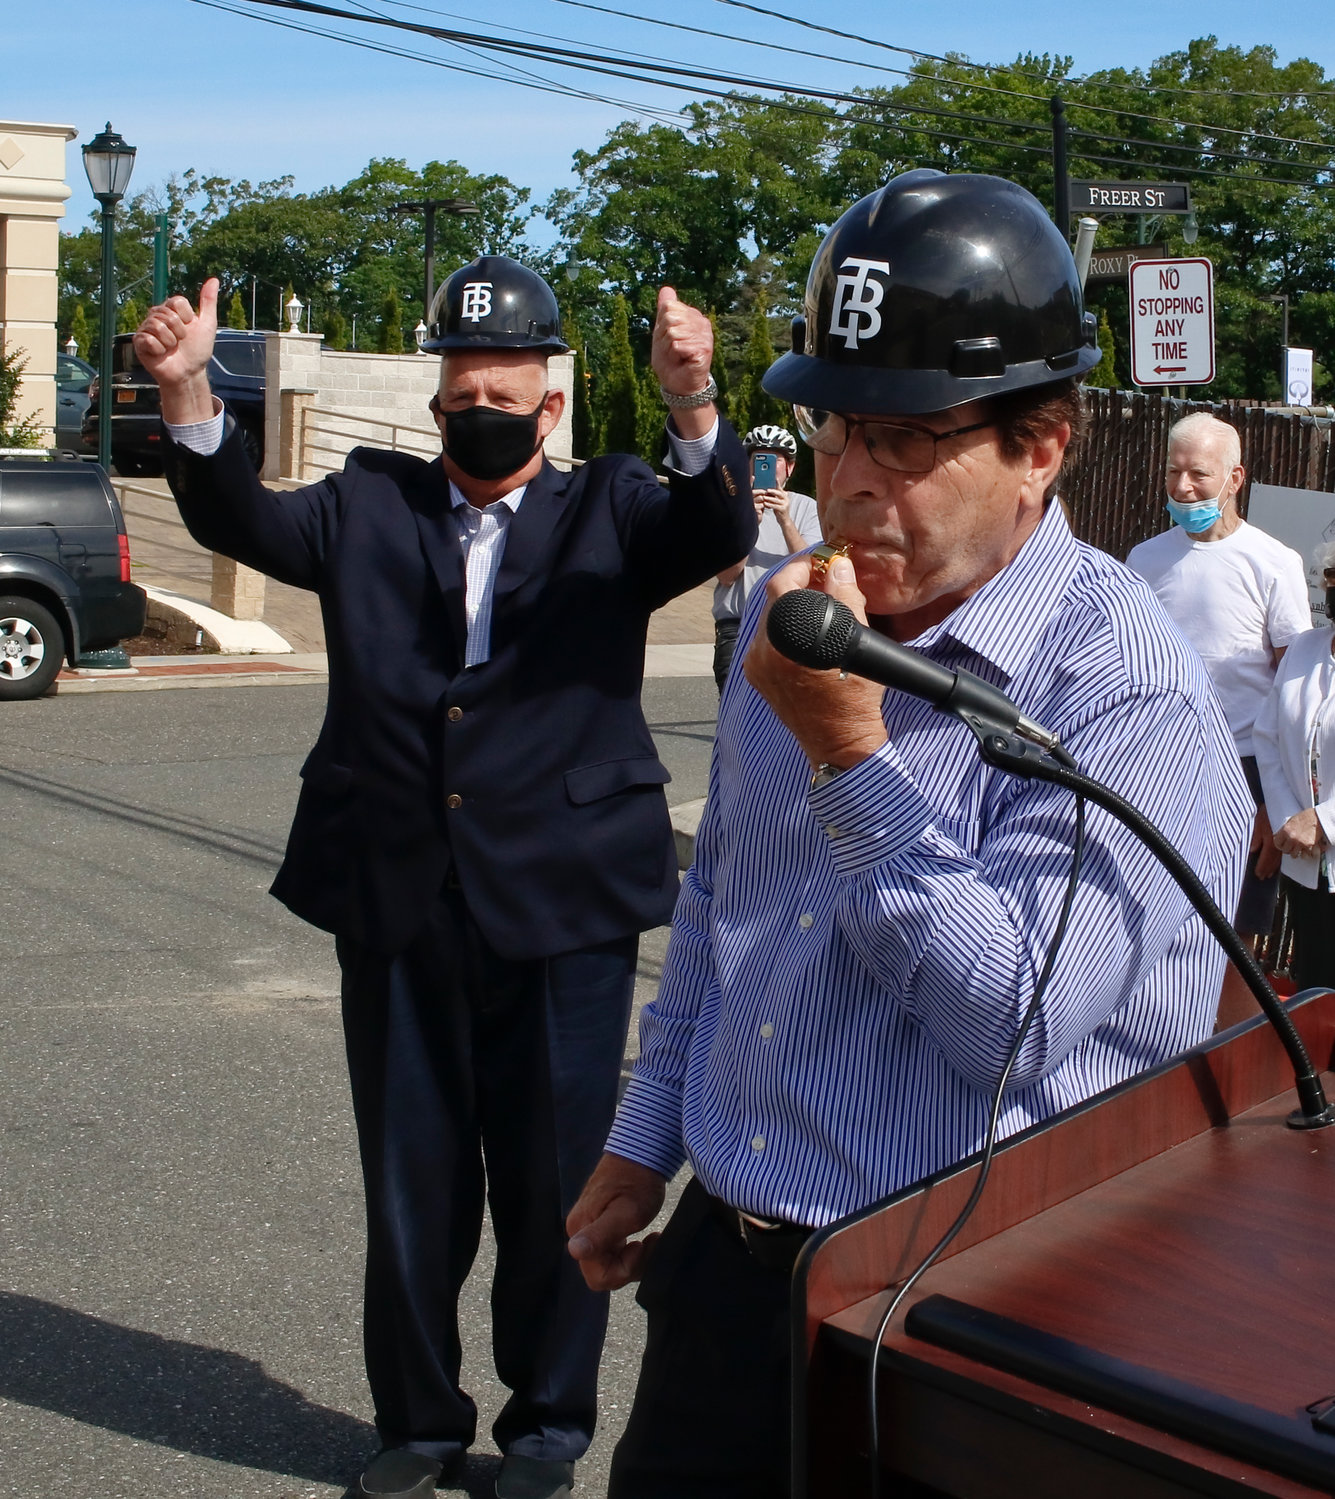 Mayor Alan Beach was presented with a golden whistle, which he blew to mark the start of demolition as Nassau County Industrial Development Agency Chairman Richard Kessel cheered.